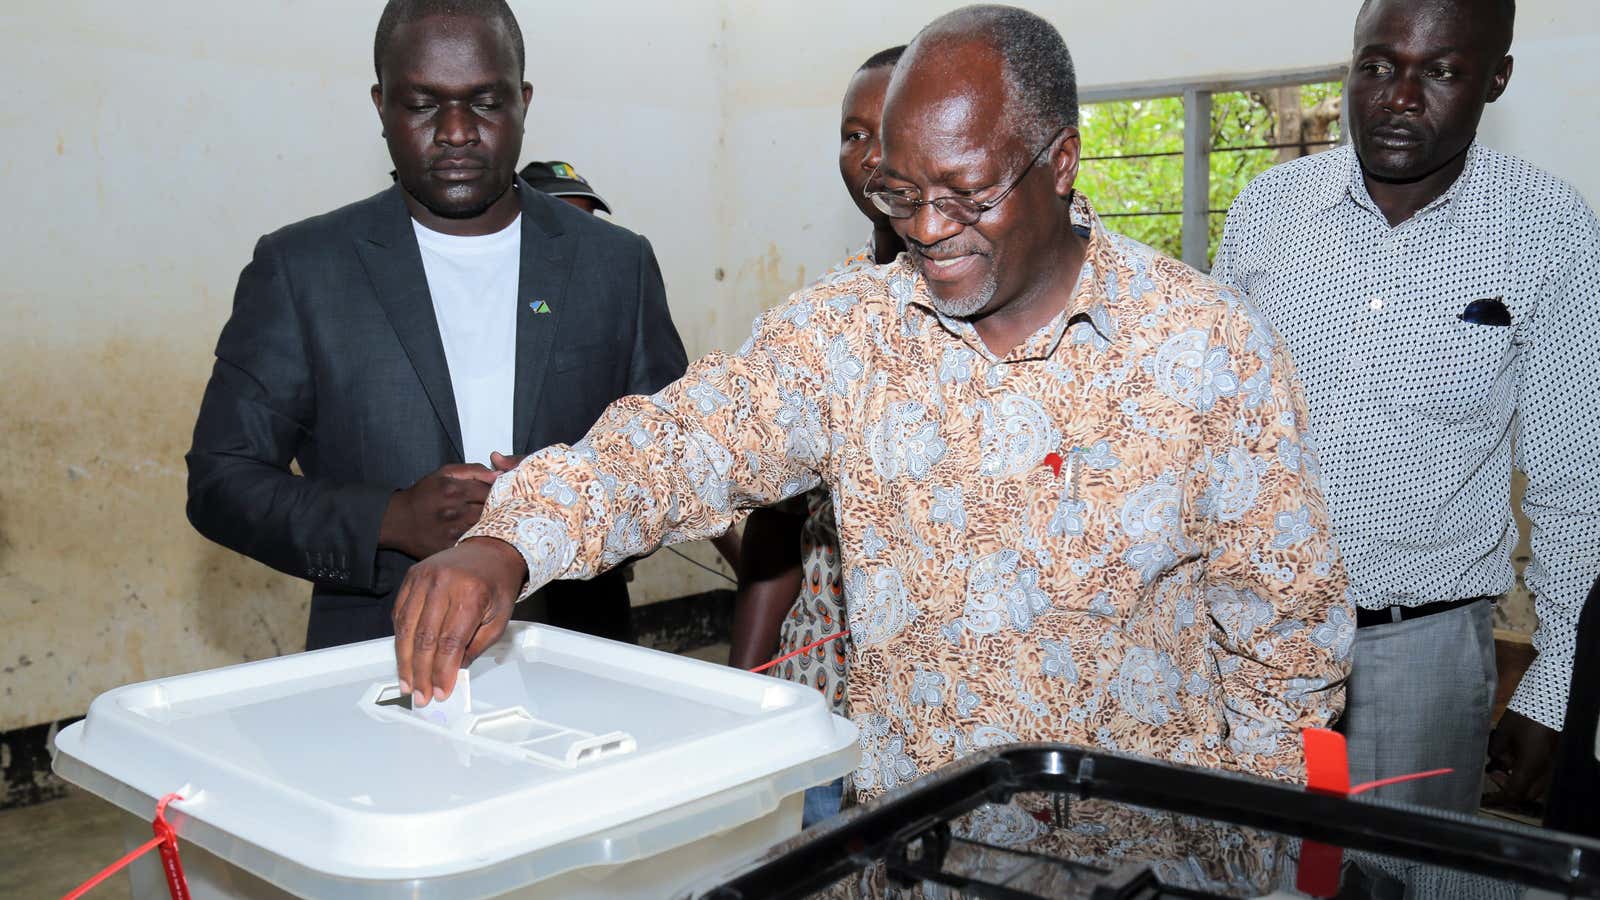 Then presidential candidate, John Magufuli casting his vote, Oct. 25, 2015